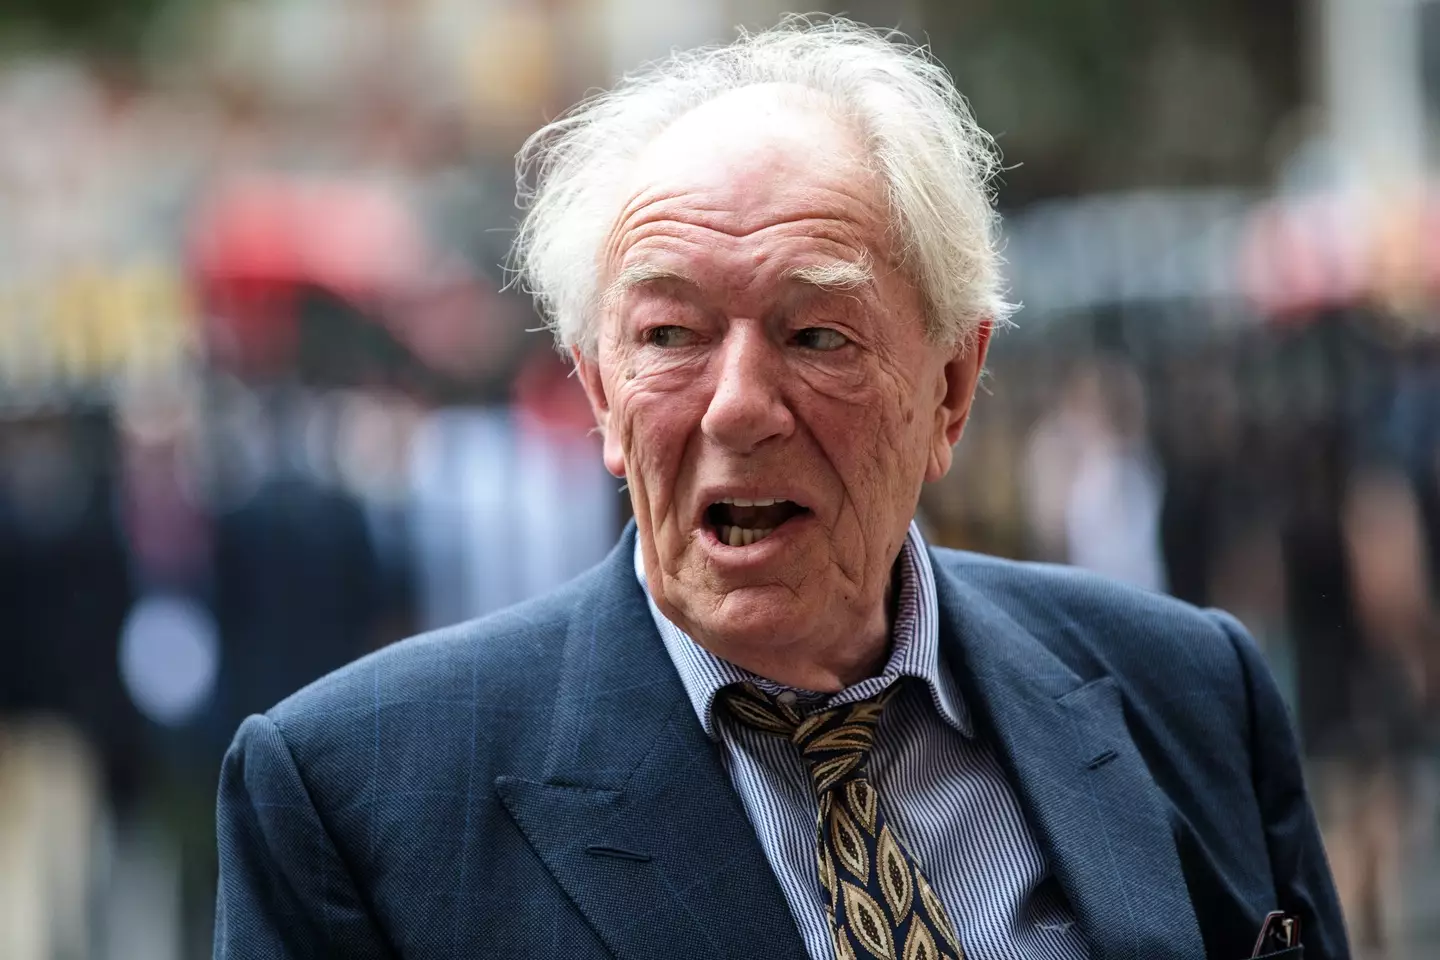 Gambon was known for his work on both stage and screen.